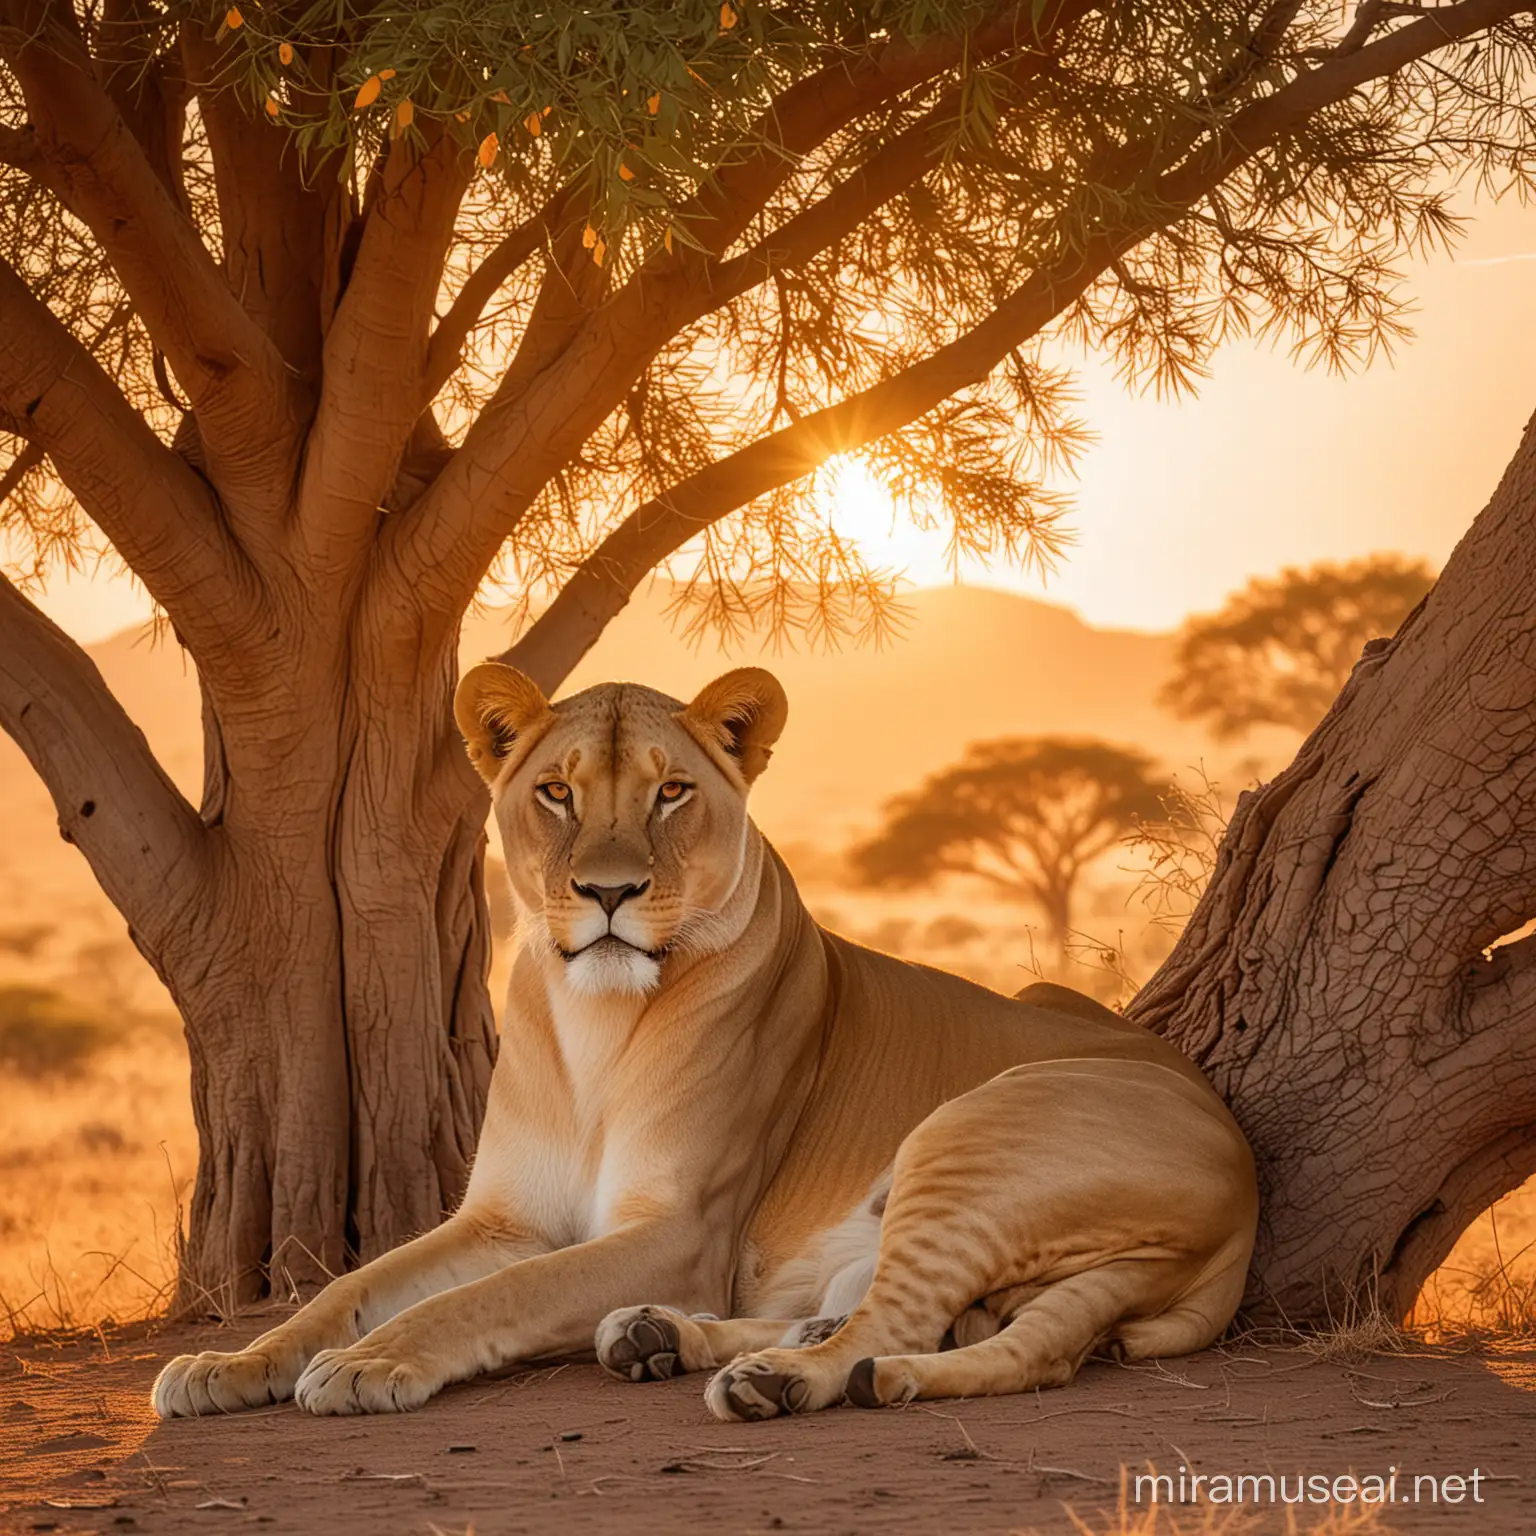 An image of a lioness resting under an acacia tree at sunset, with warm orange hues illuminating the landscape, captured with a DSLR camera using a telephoto lens and enhanced with lightroom editing